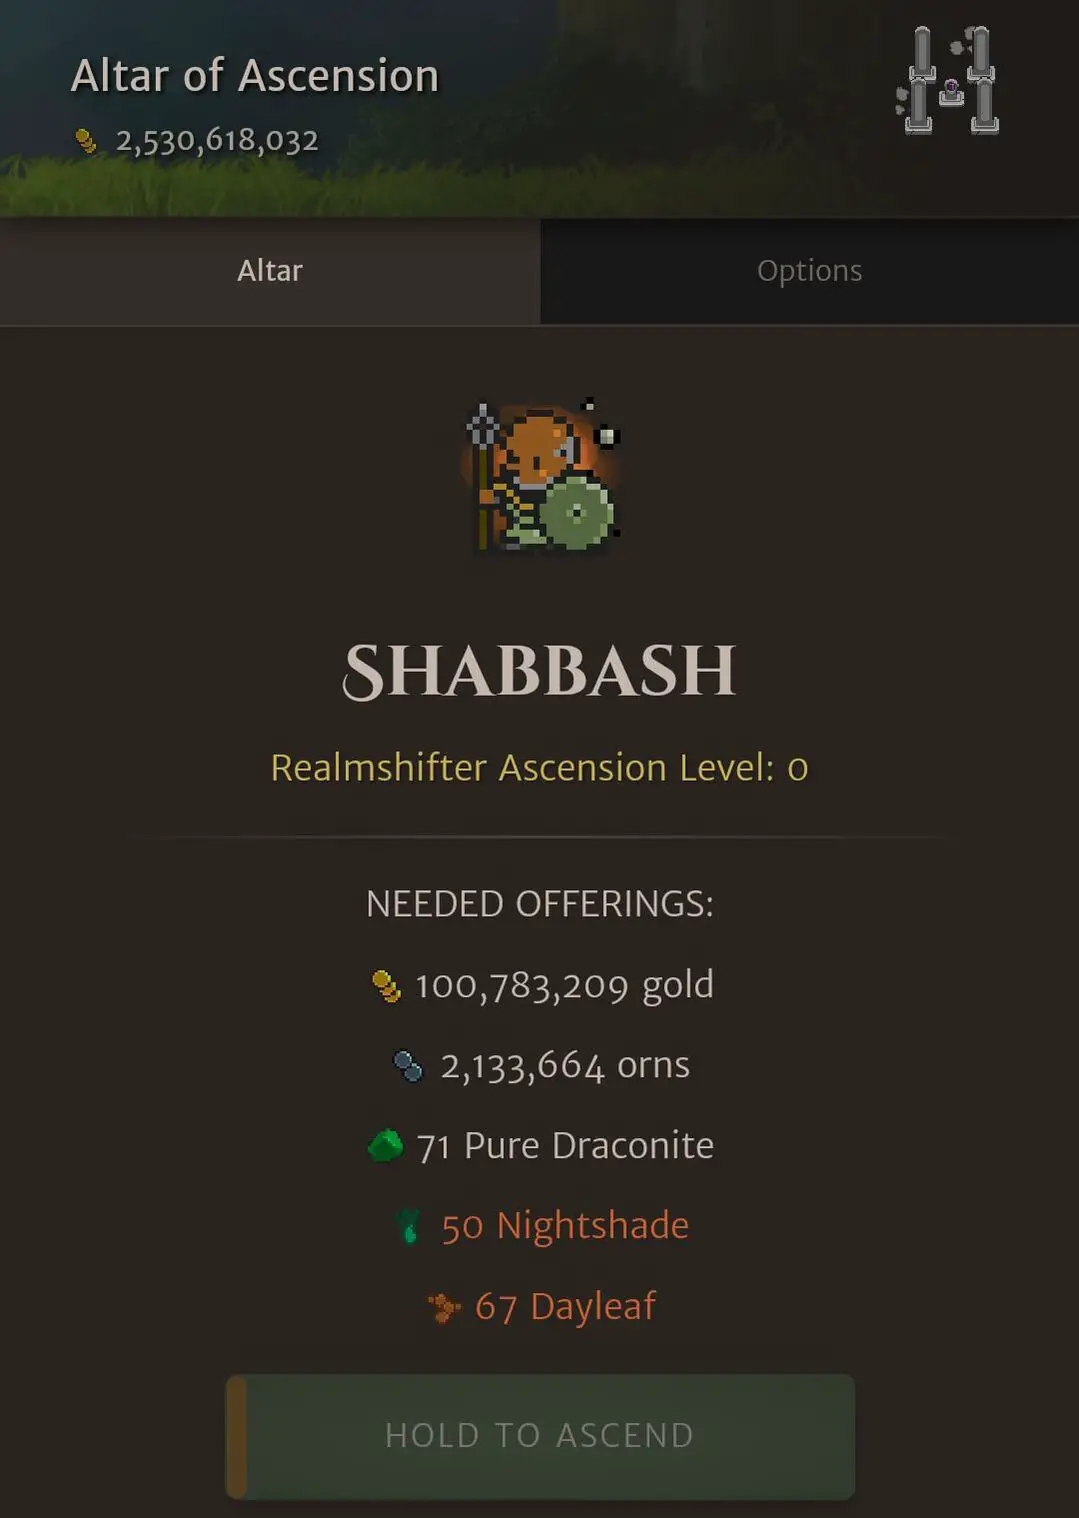 My Realmshifter Ascension Level 1 Costs in Orna